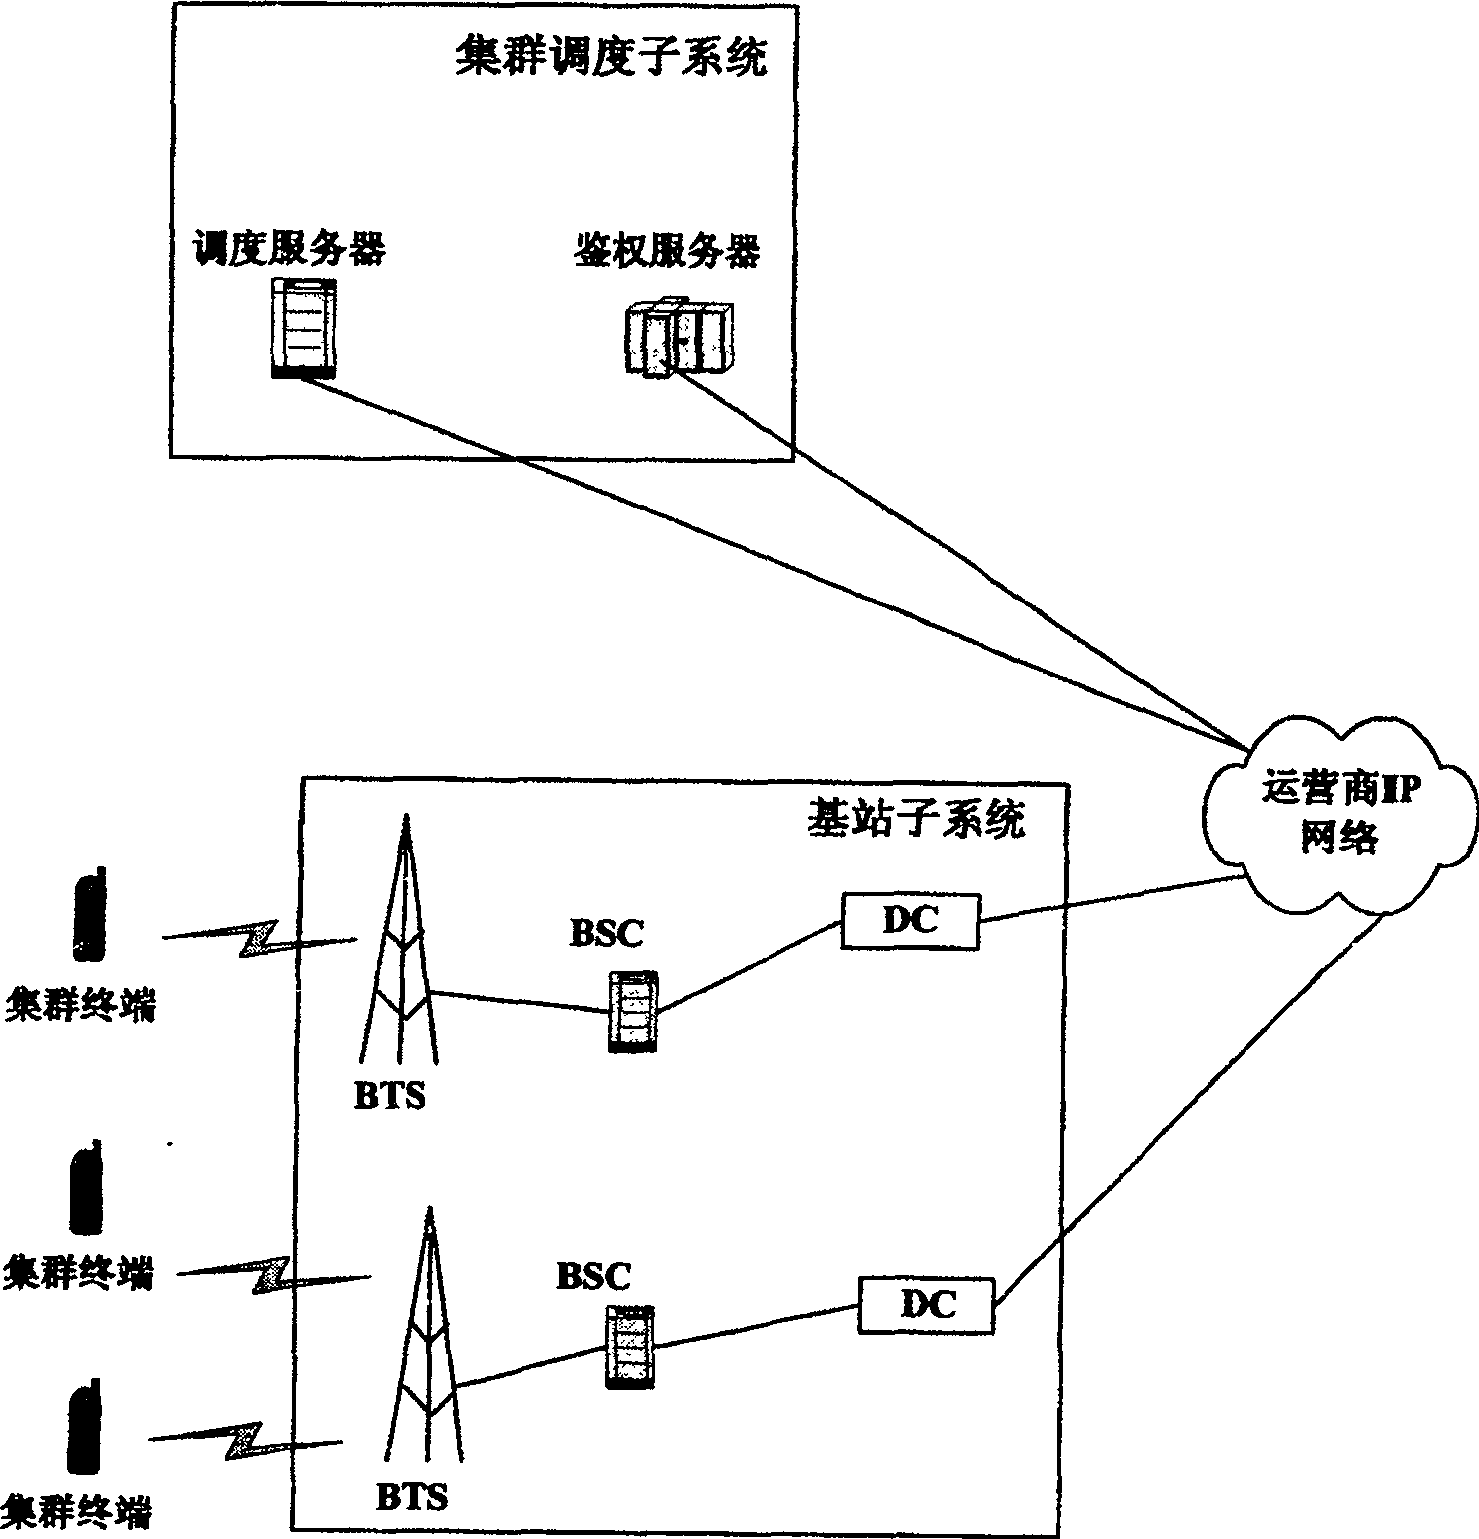 Method for realizing roaming control in clustering system and roaming charging method